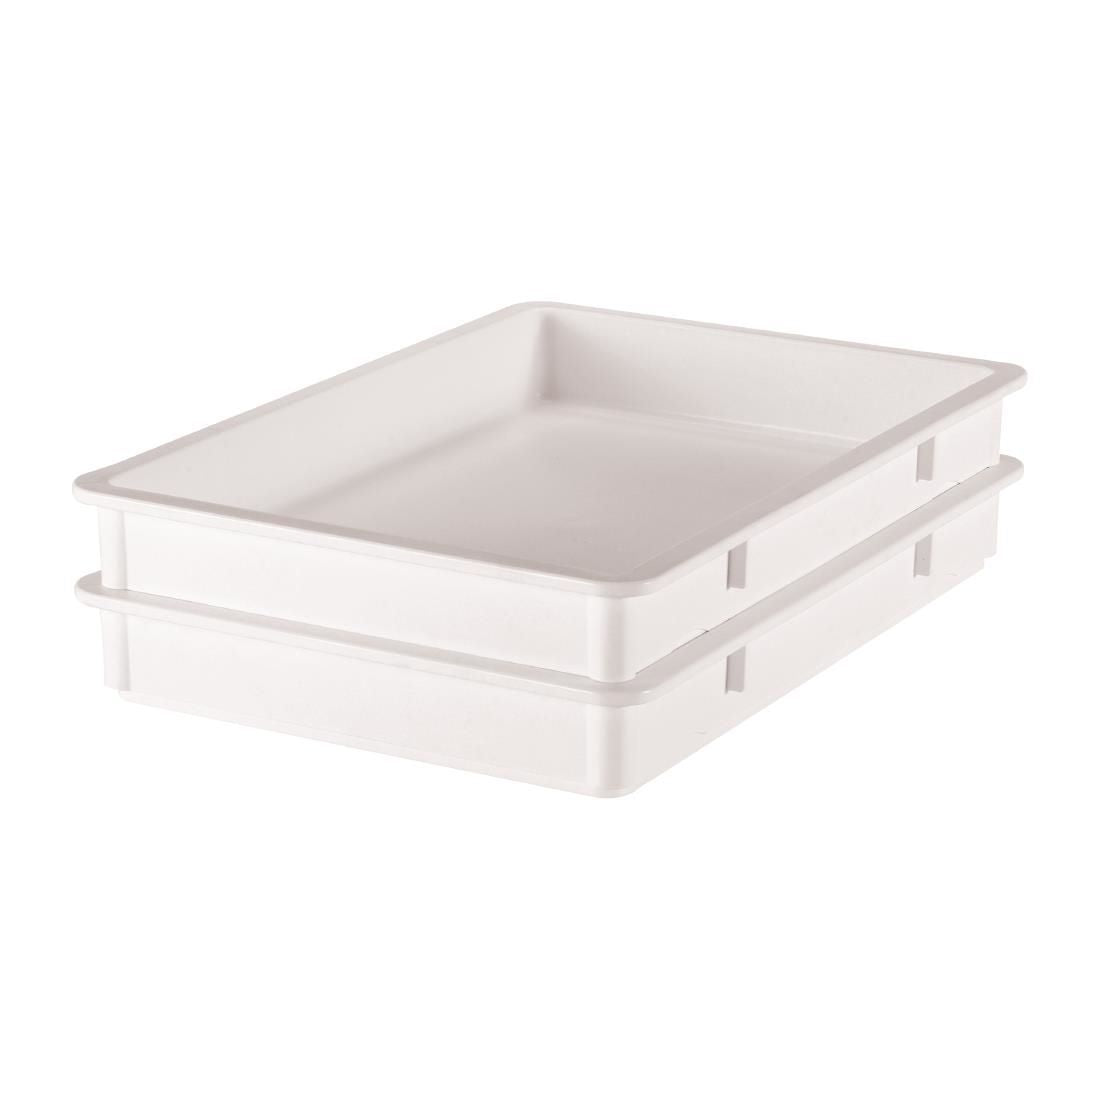 CW800 Cambro Pizza Dough Proofing Box JD Catering Equipment Solutions Ltd